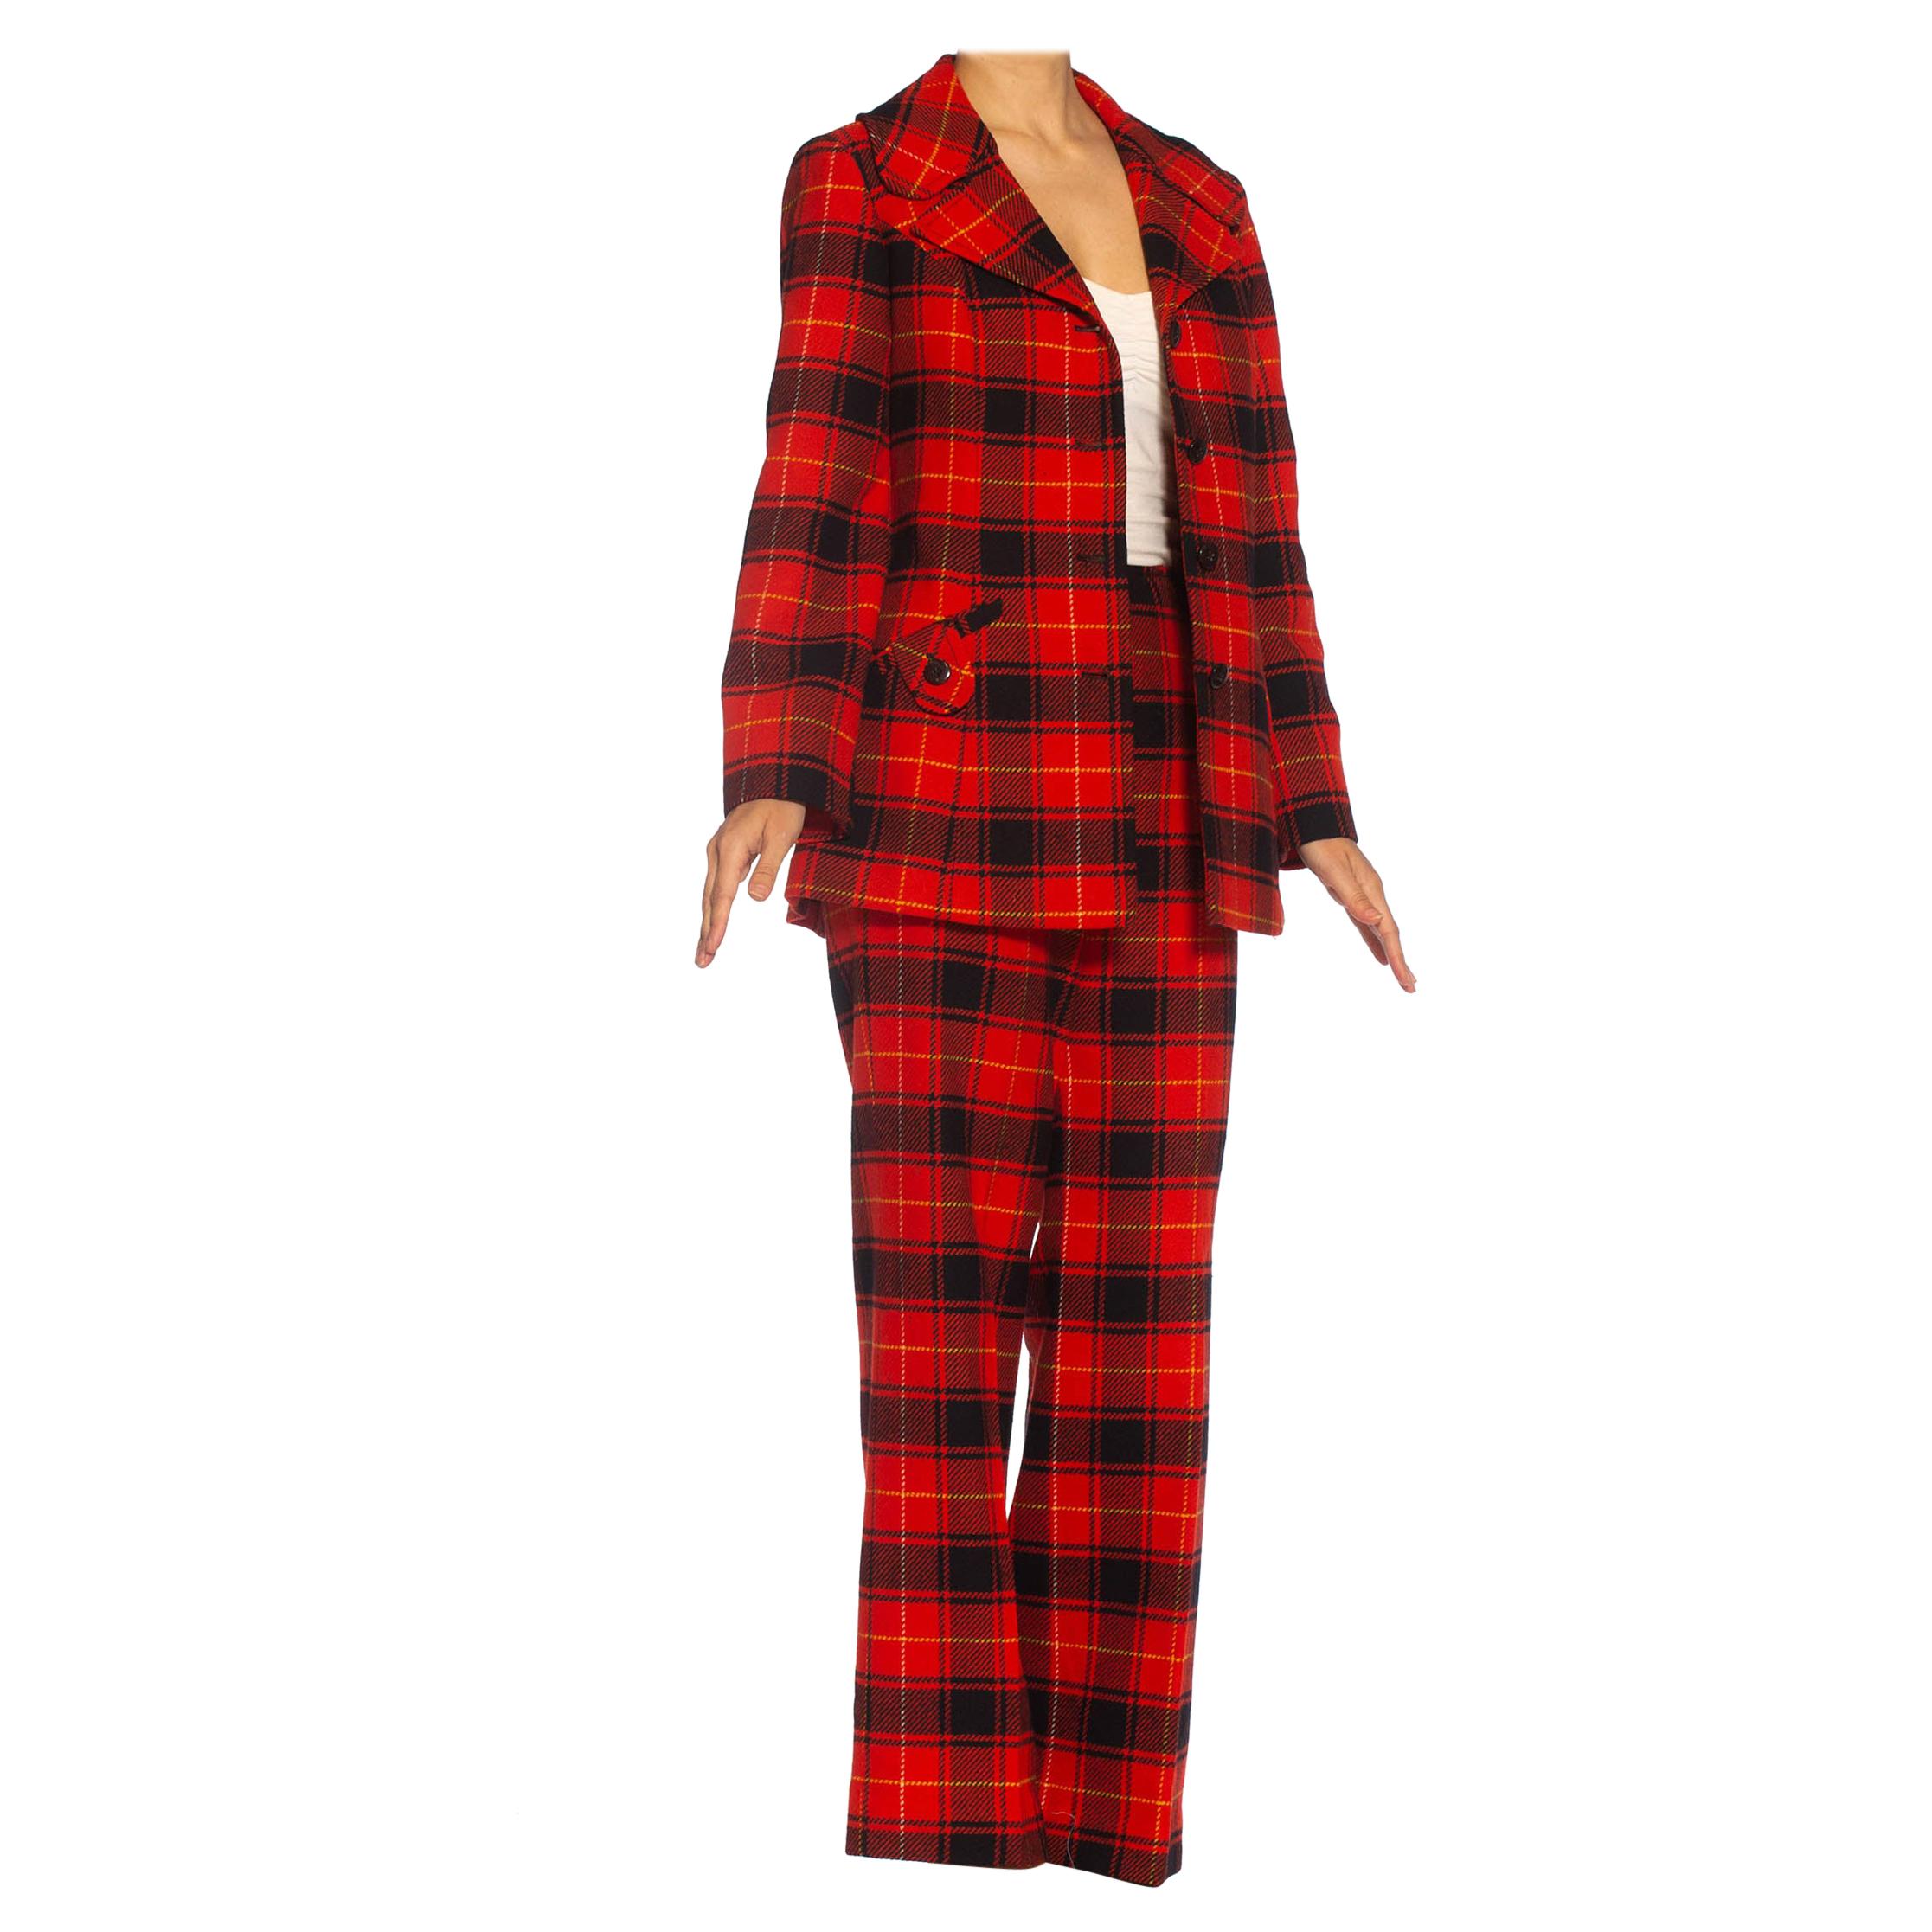 1960S PENDLETON Red & Black Plaid Wool Fully Lined, Wide Lapel Pant Suit